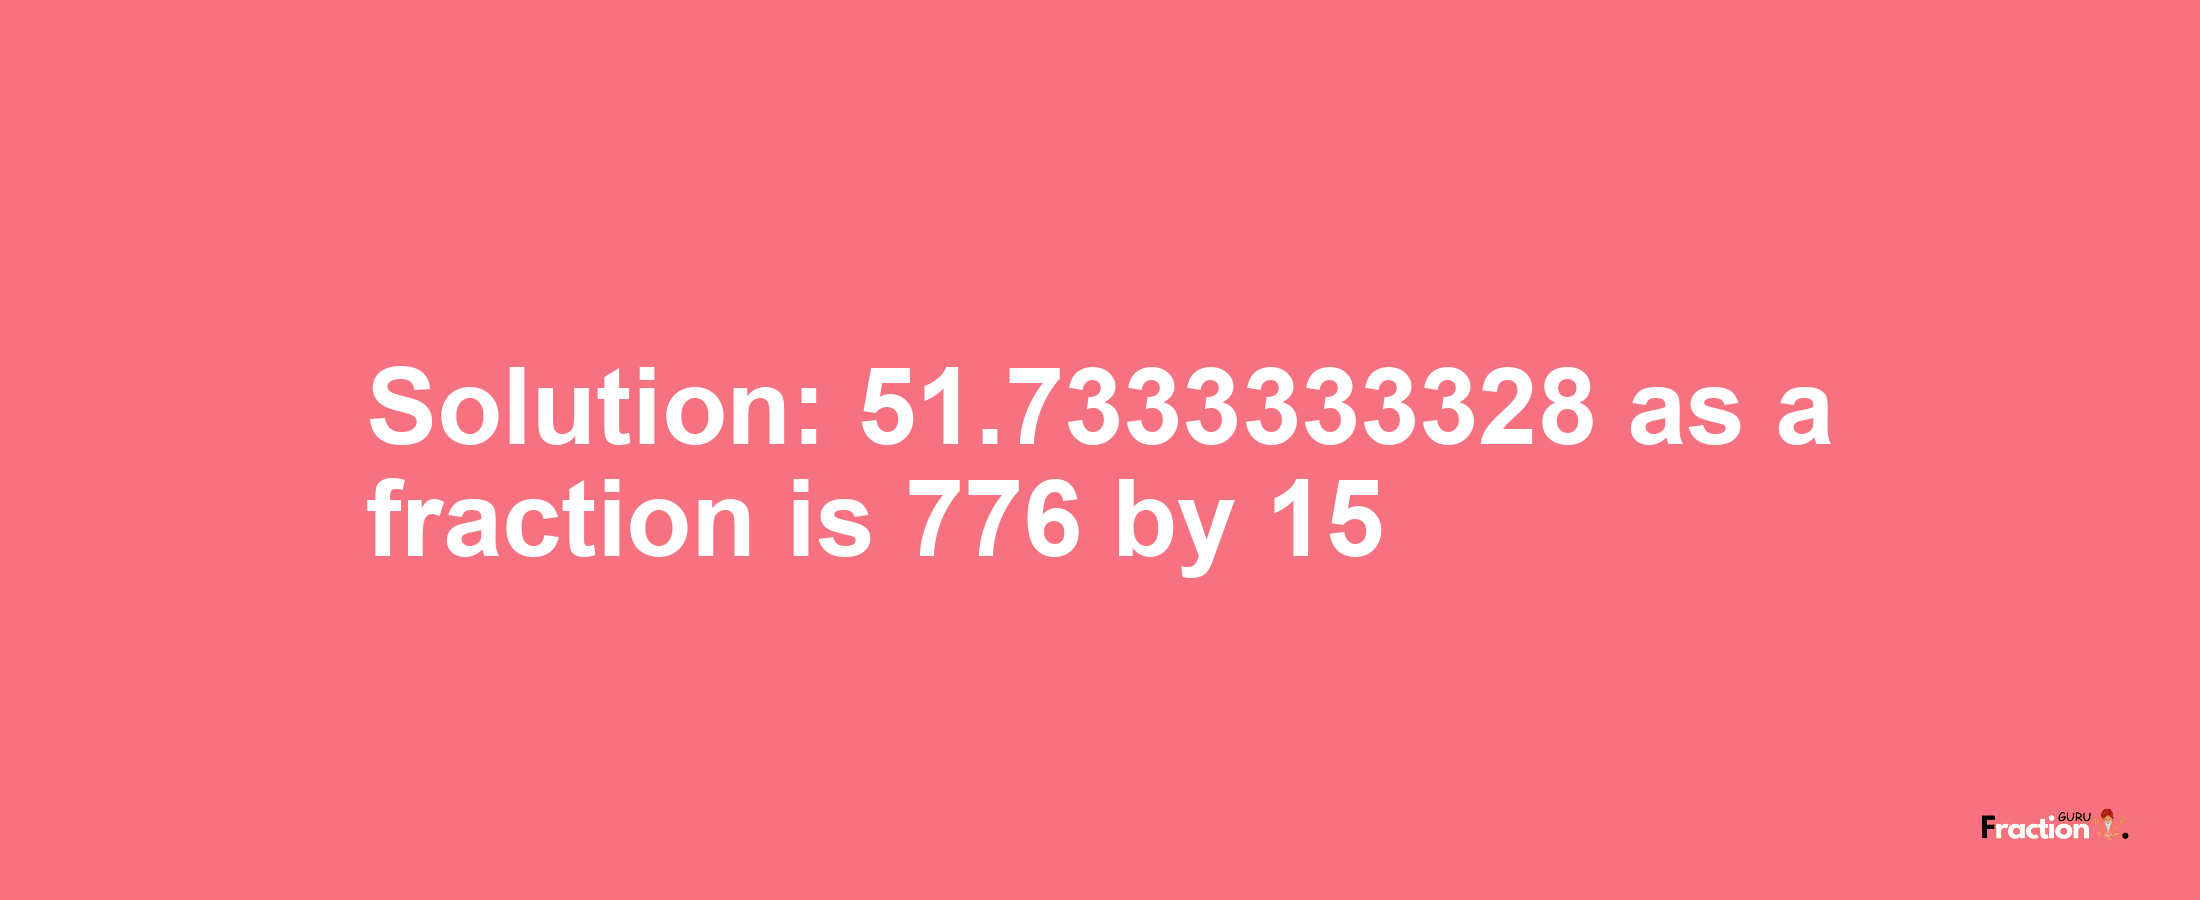 Solution:51.7333333328 as a fraction is 776/15